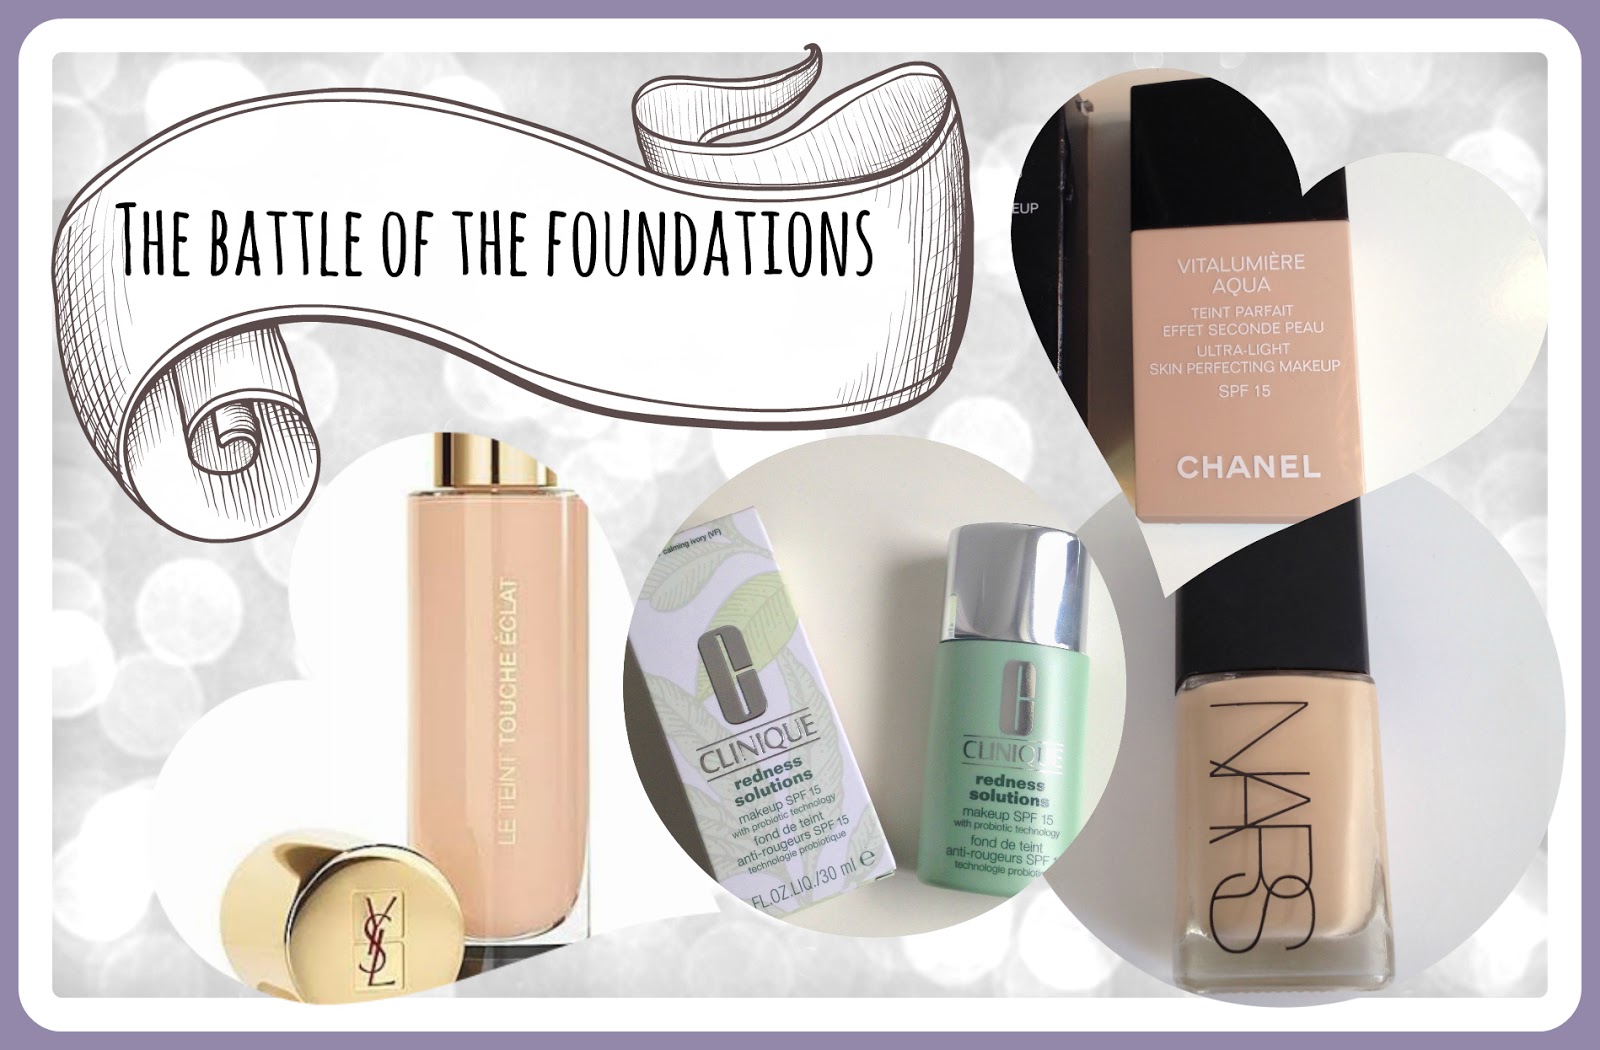 My Beautopia: The Battle of the Foundations: High End Products